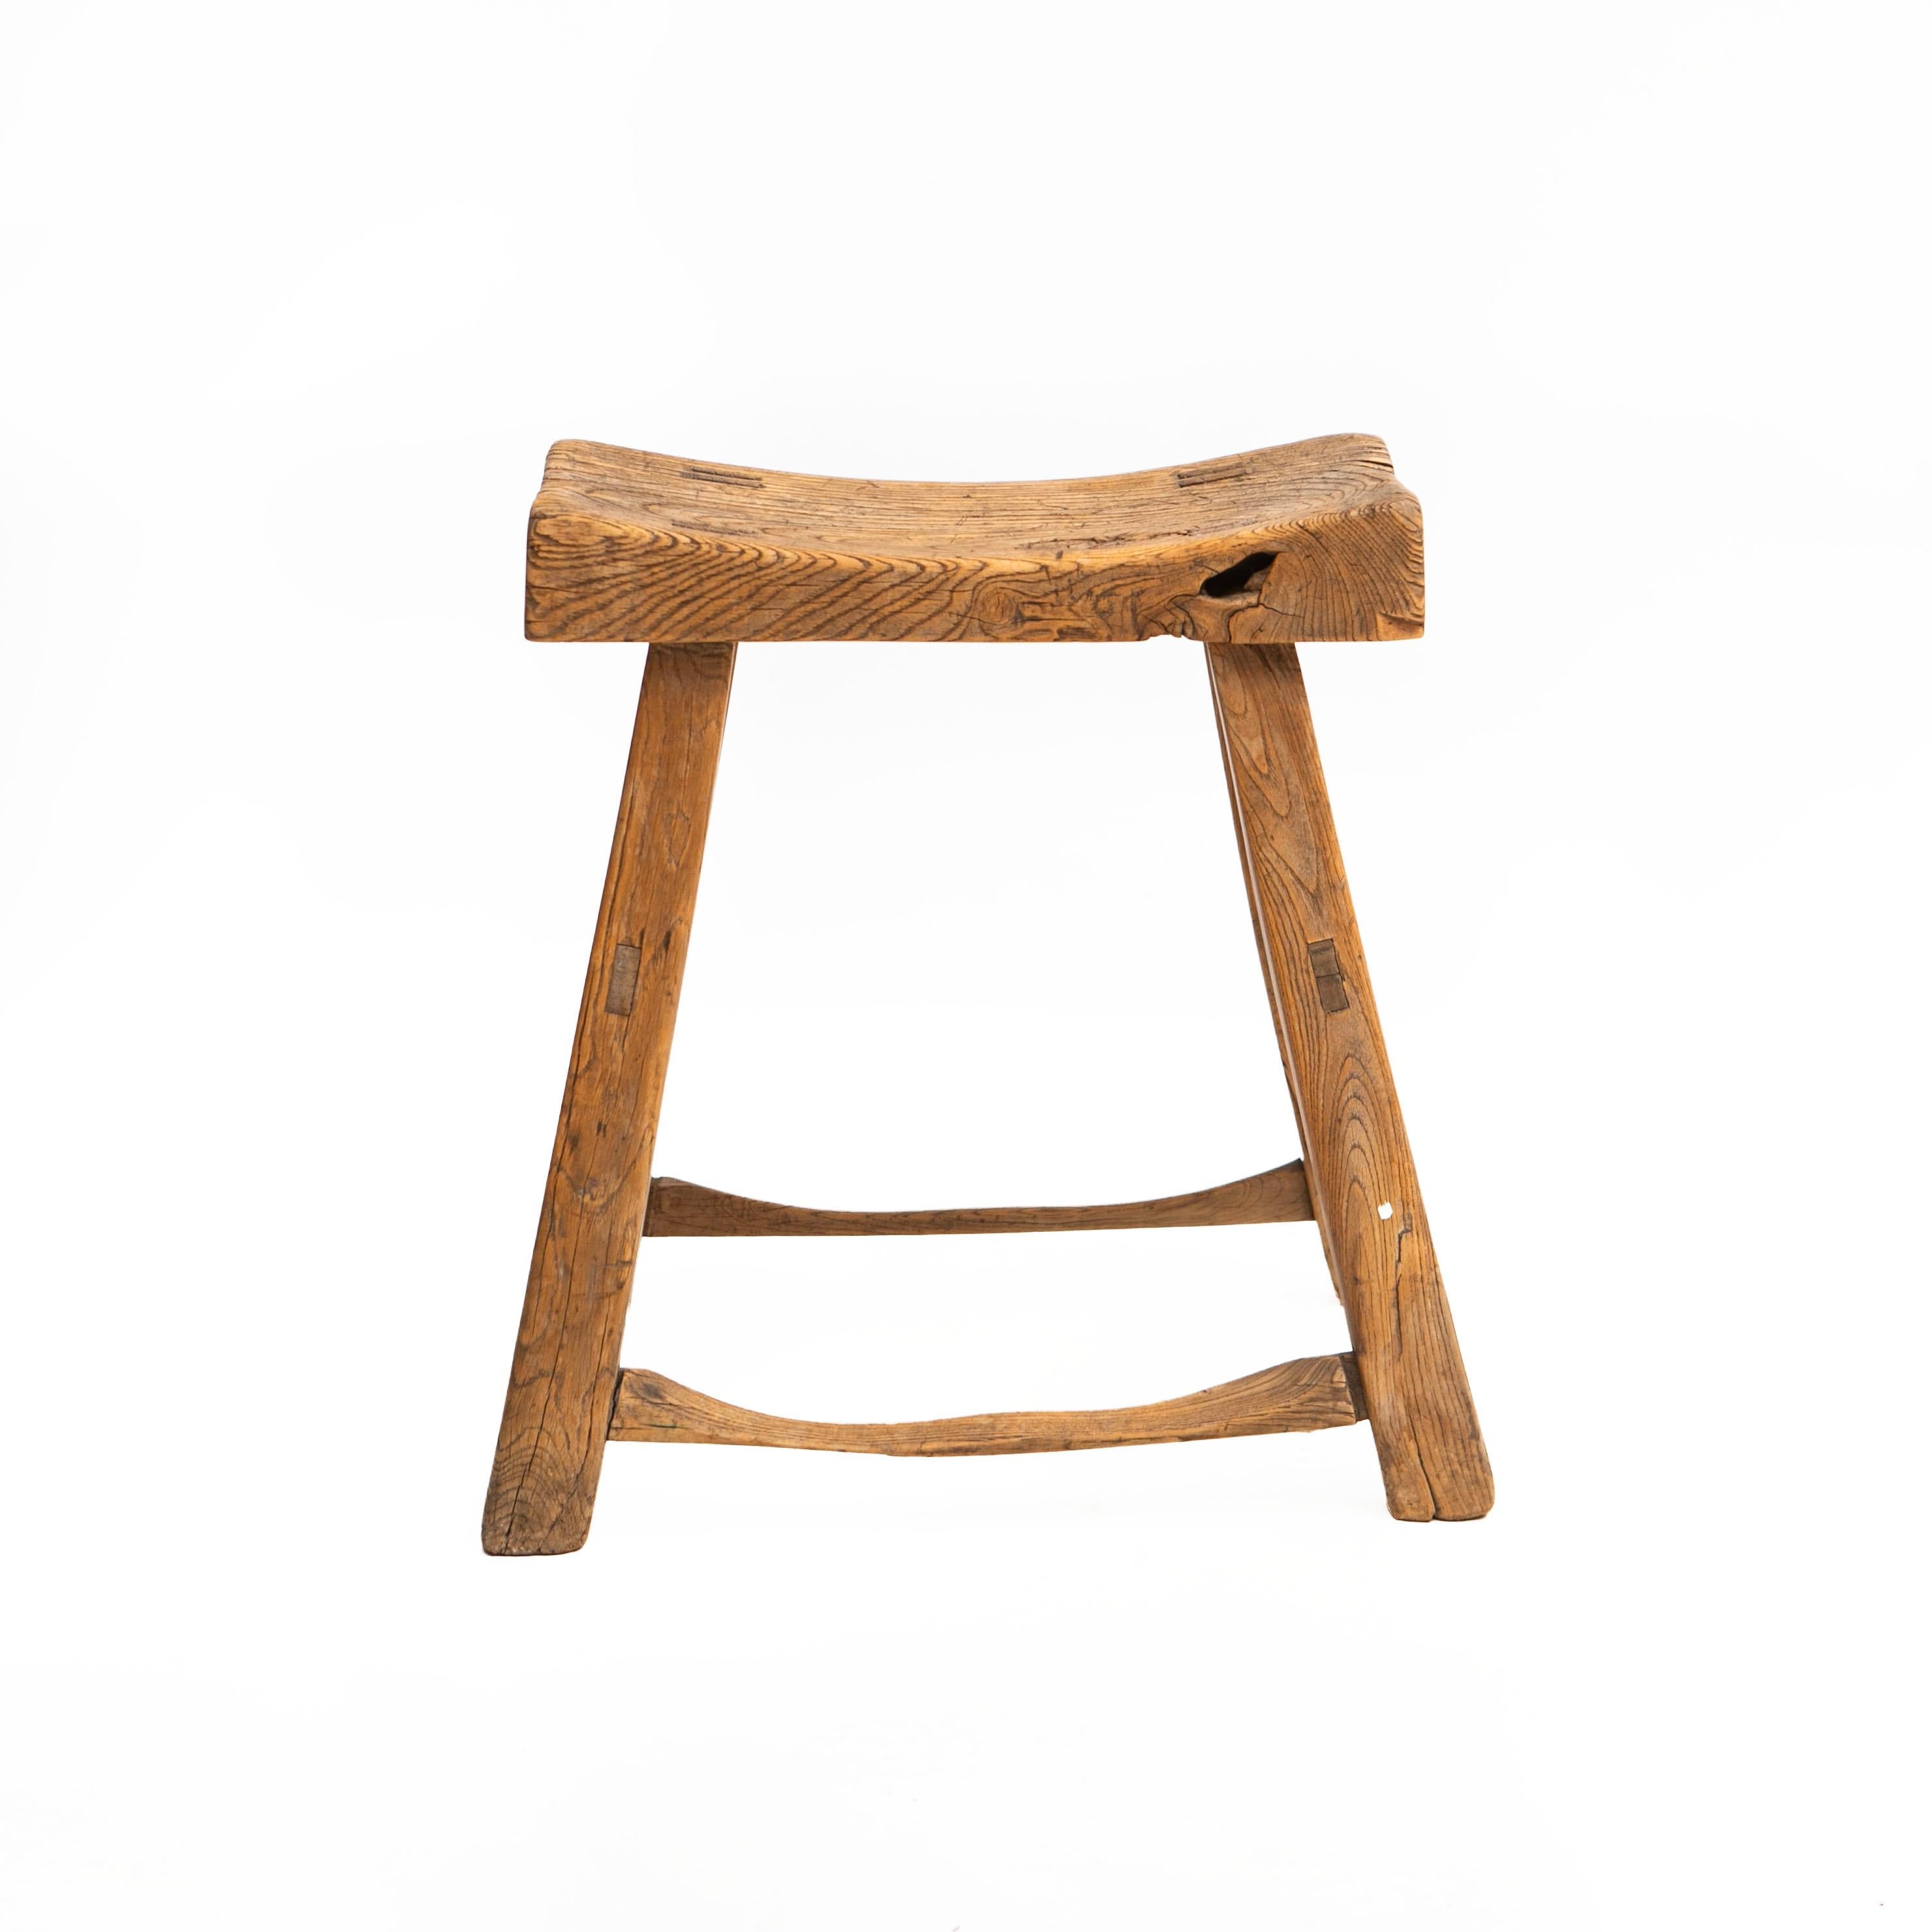 Chinese Qing period 18th century four-legged elmwood stool.
Gently restored to retain the beautiful age-related rustic look and patina.

China 18th century